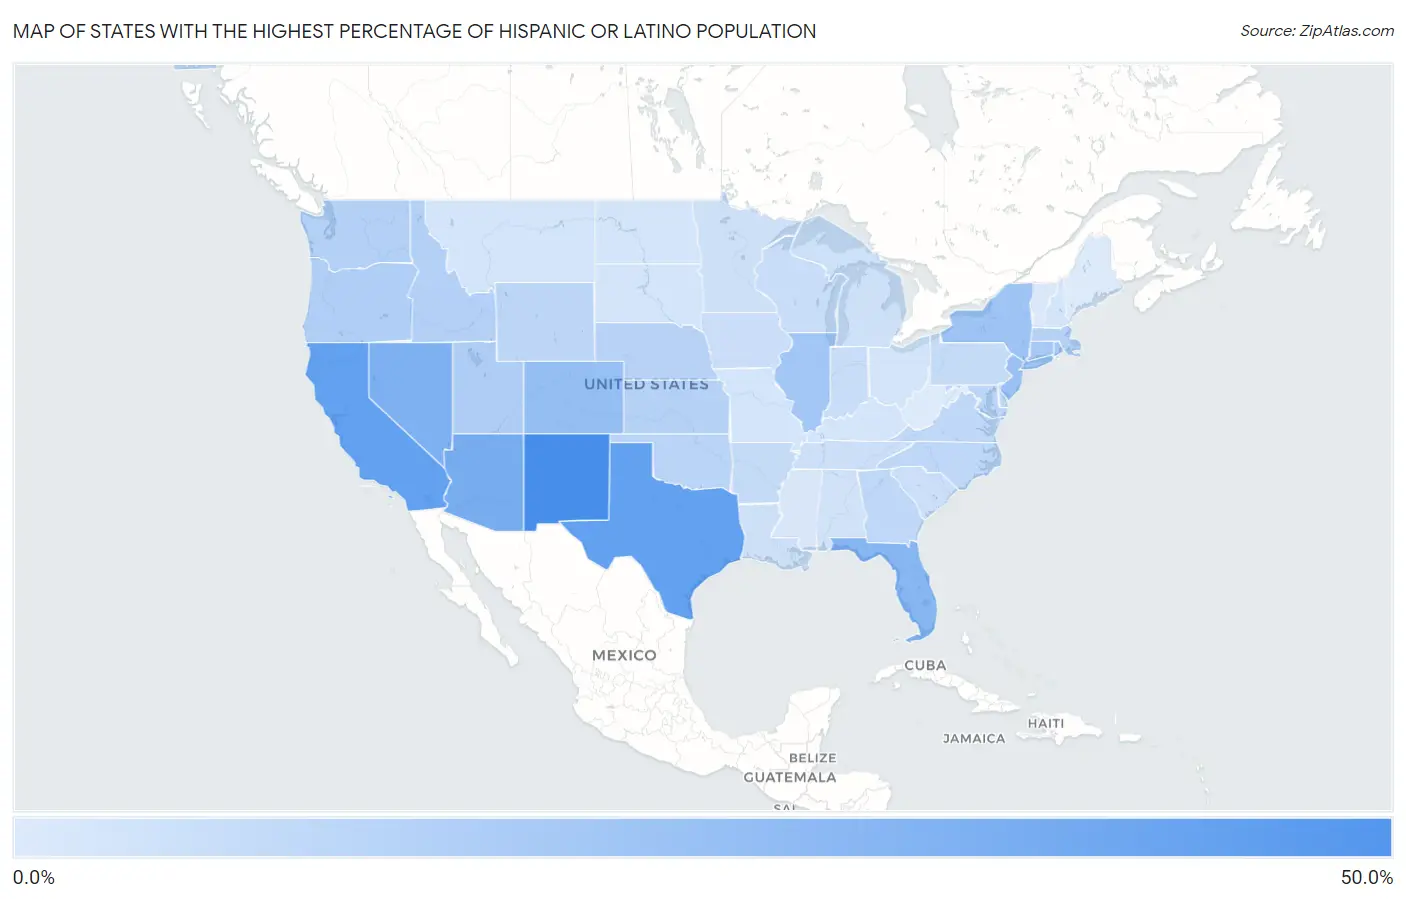 States with the Highest Percentage of Hispanic or Latino Population in the United States Map